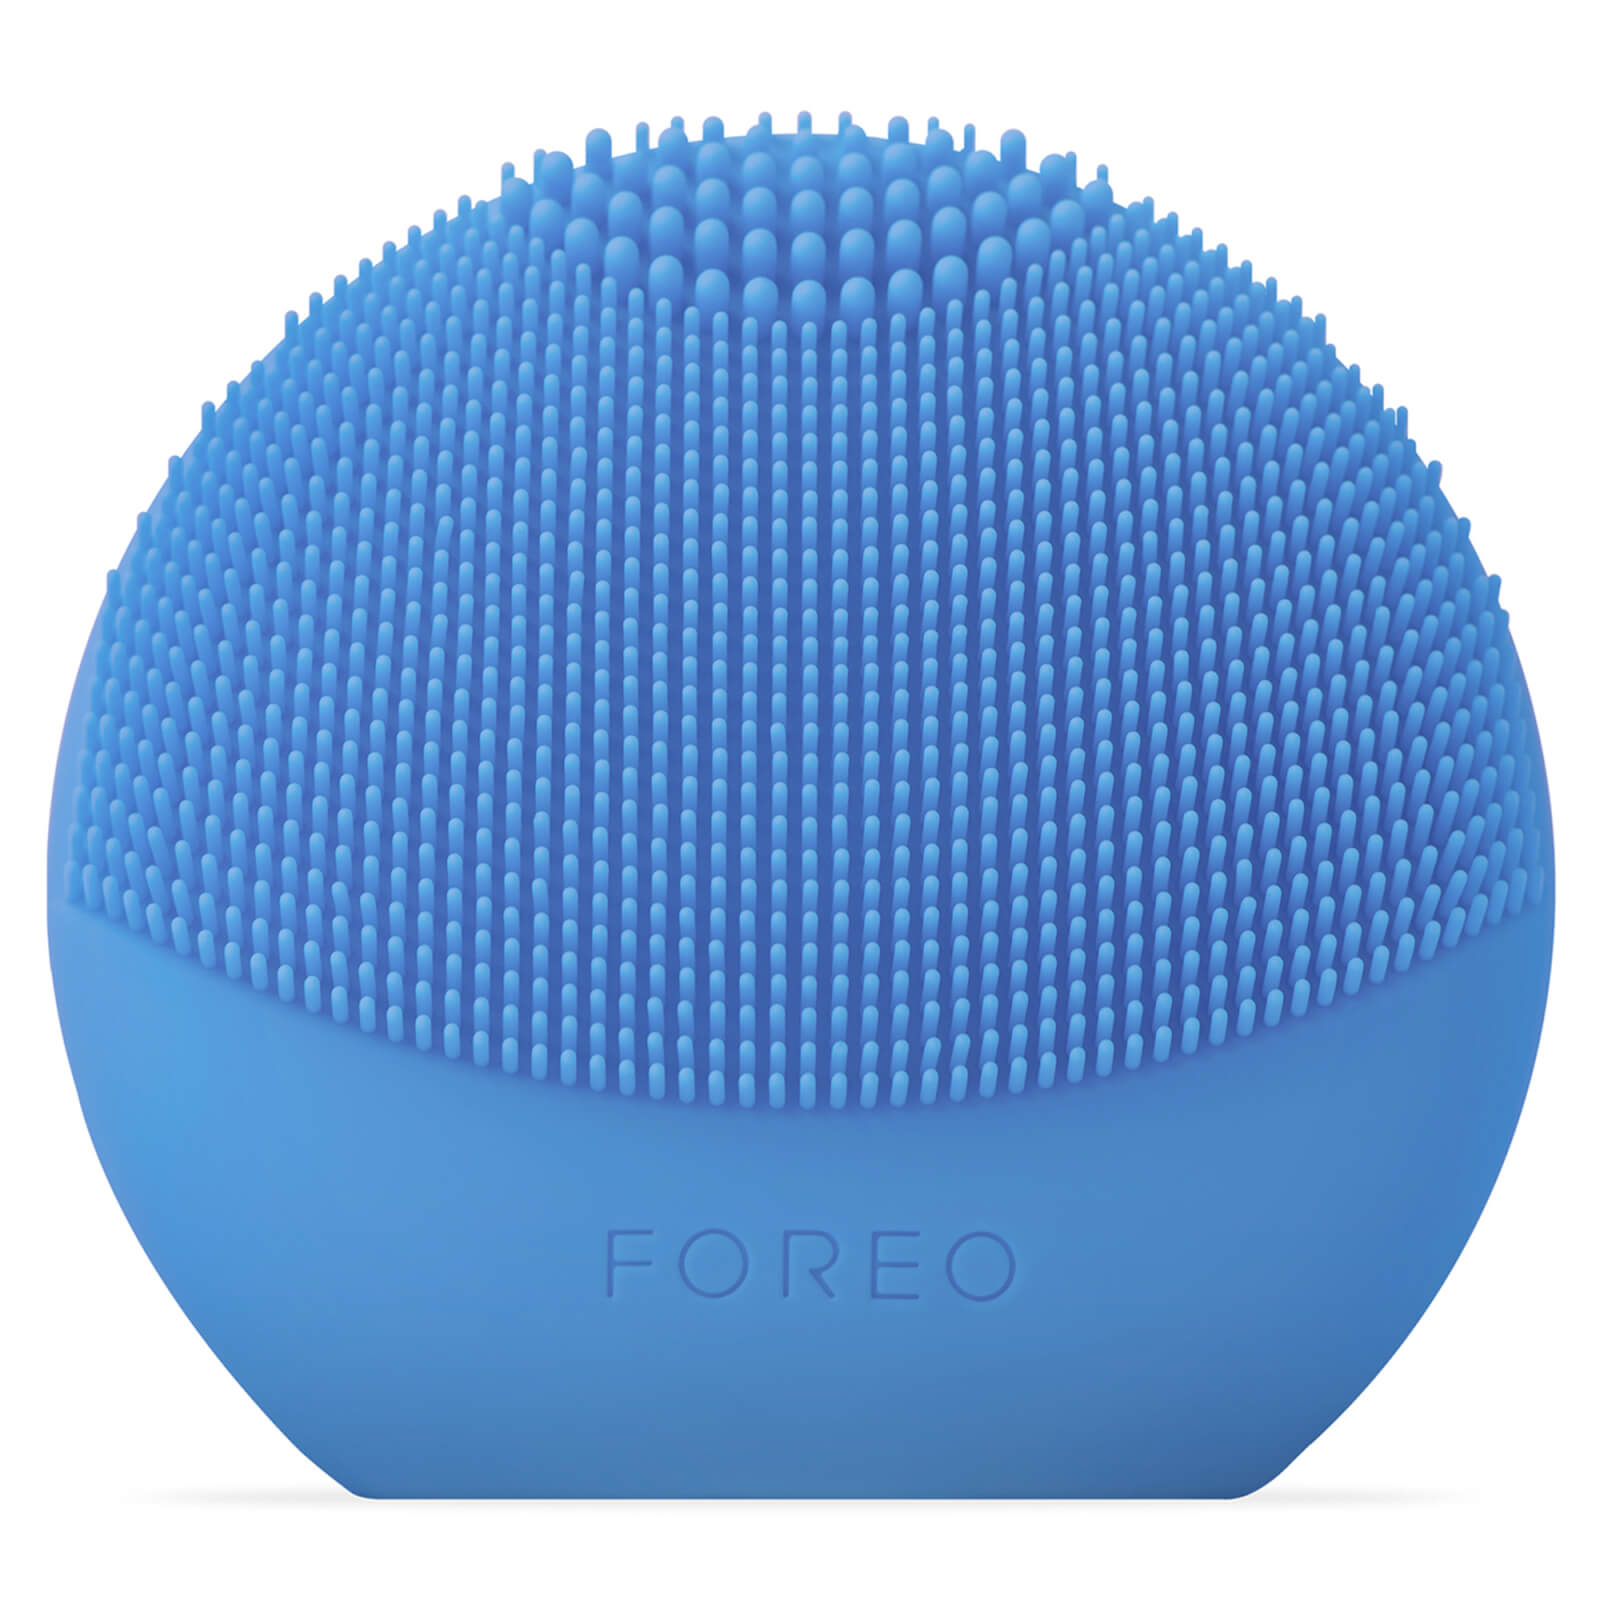 FOREO FOREO LUNA FOFO FACIAL BRUSH WITH SKIN ANALYSIS (VARIOUS SHADES),F7836